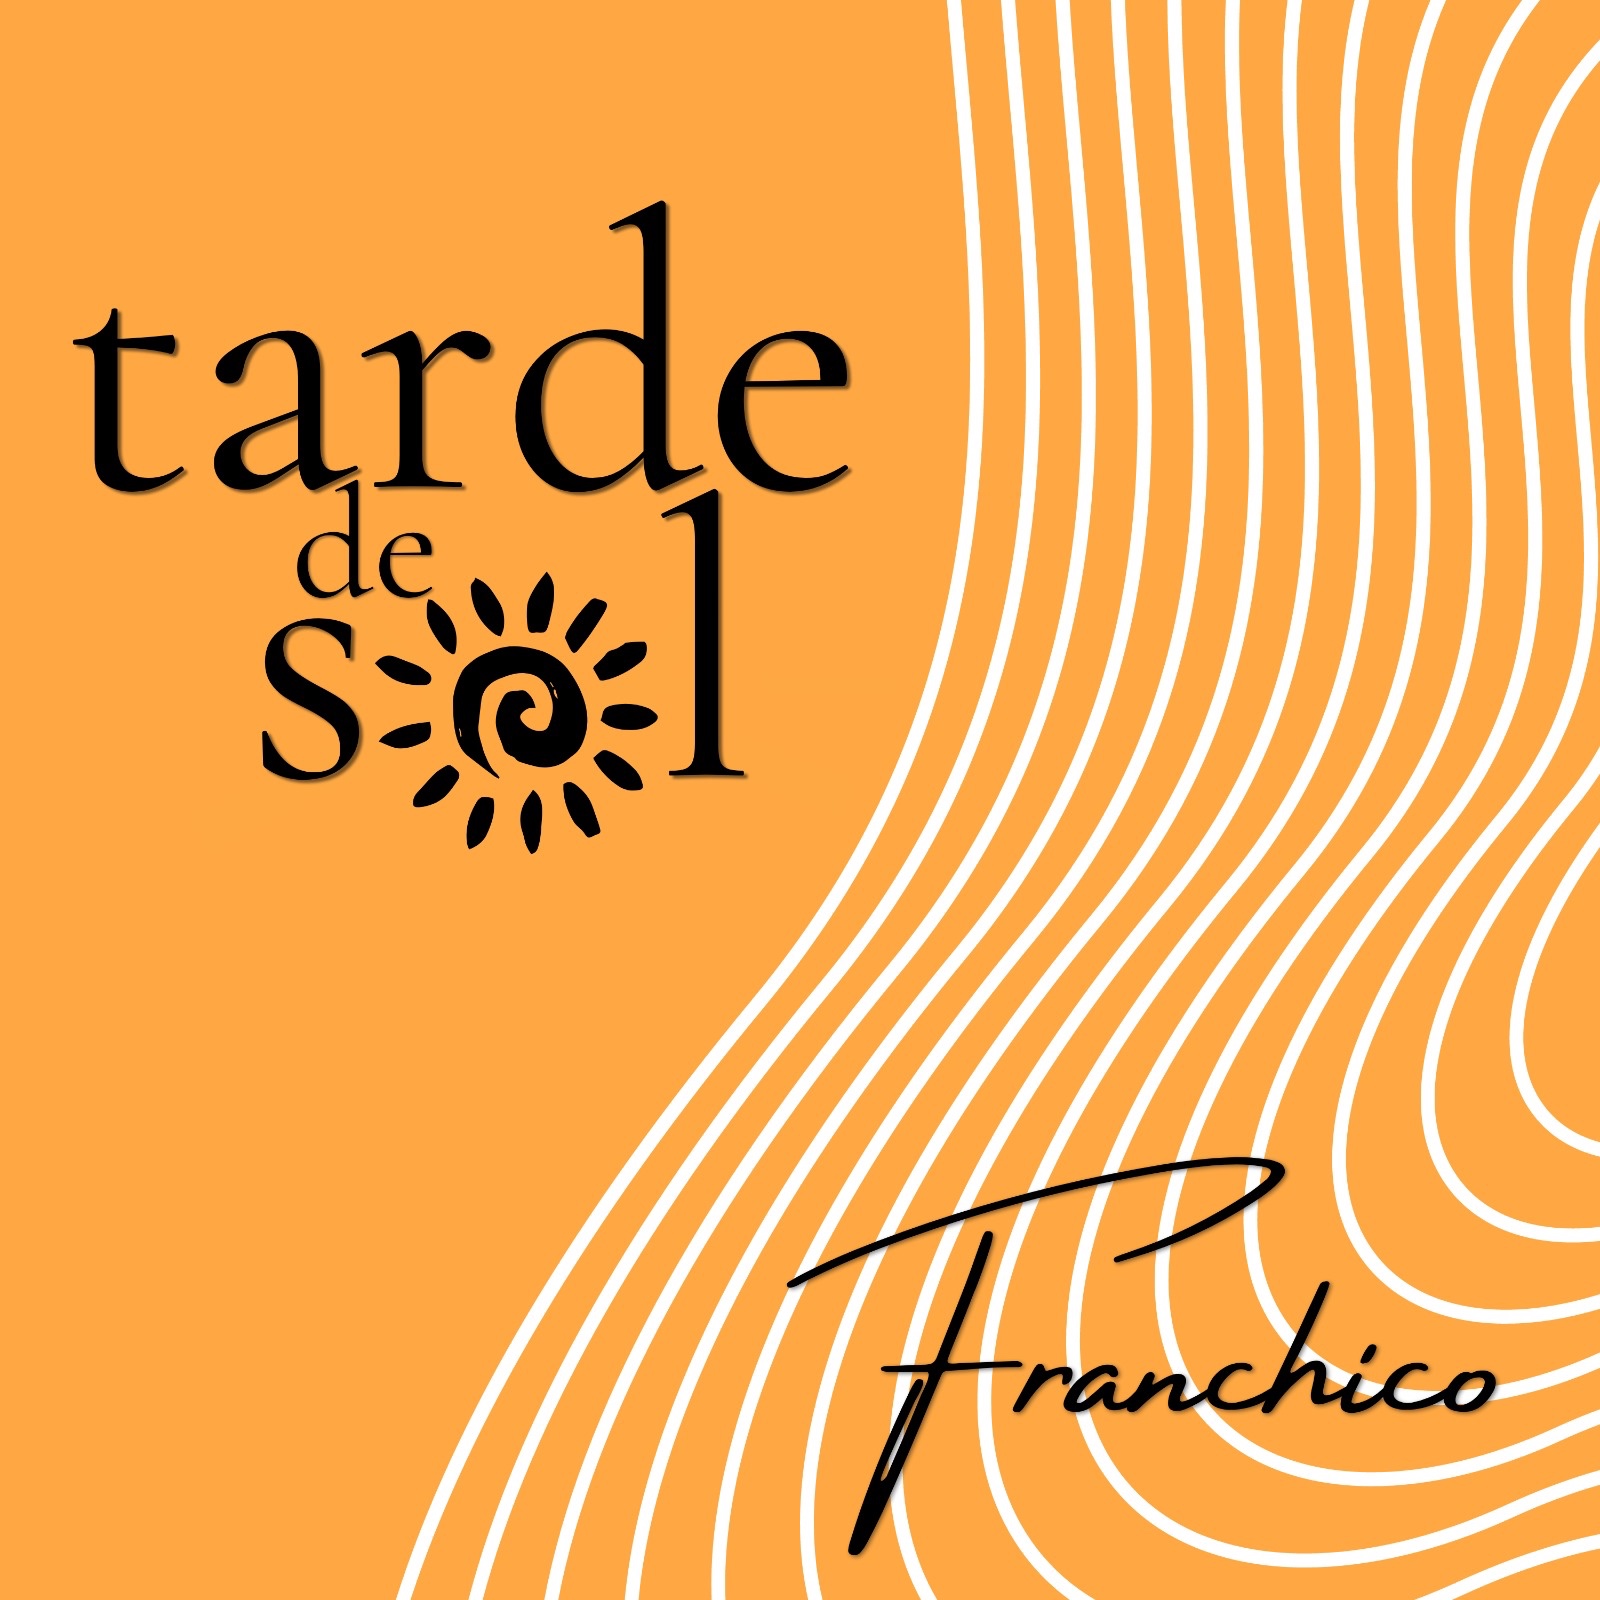 Tarde de Sol, Infatuation and Desire in the New Release by Franchico Benítez